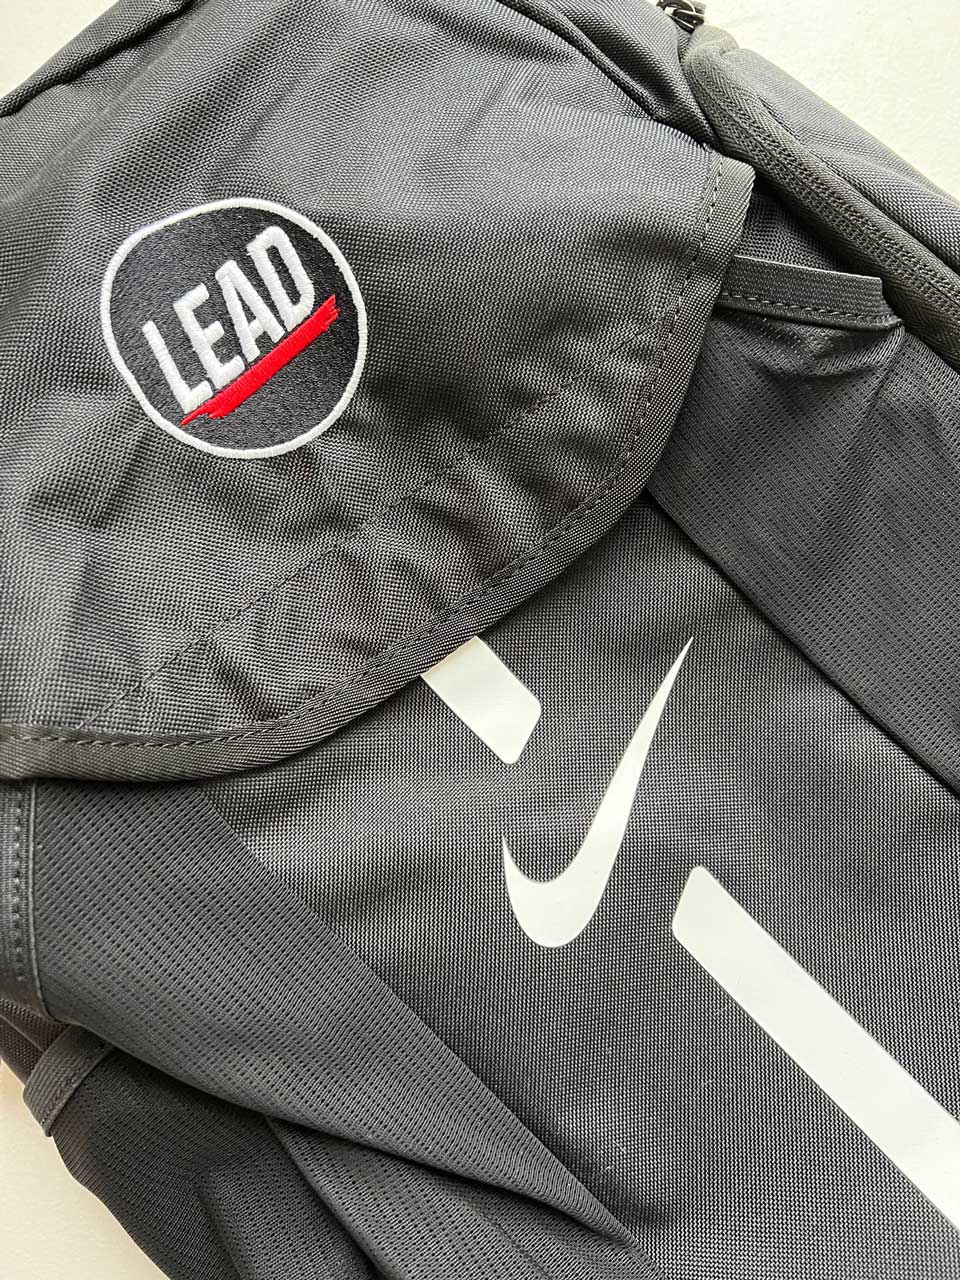 Exclusive Nike Academy Lead ‘Em Up Backpack